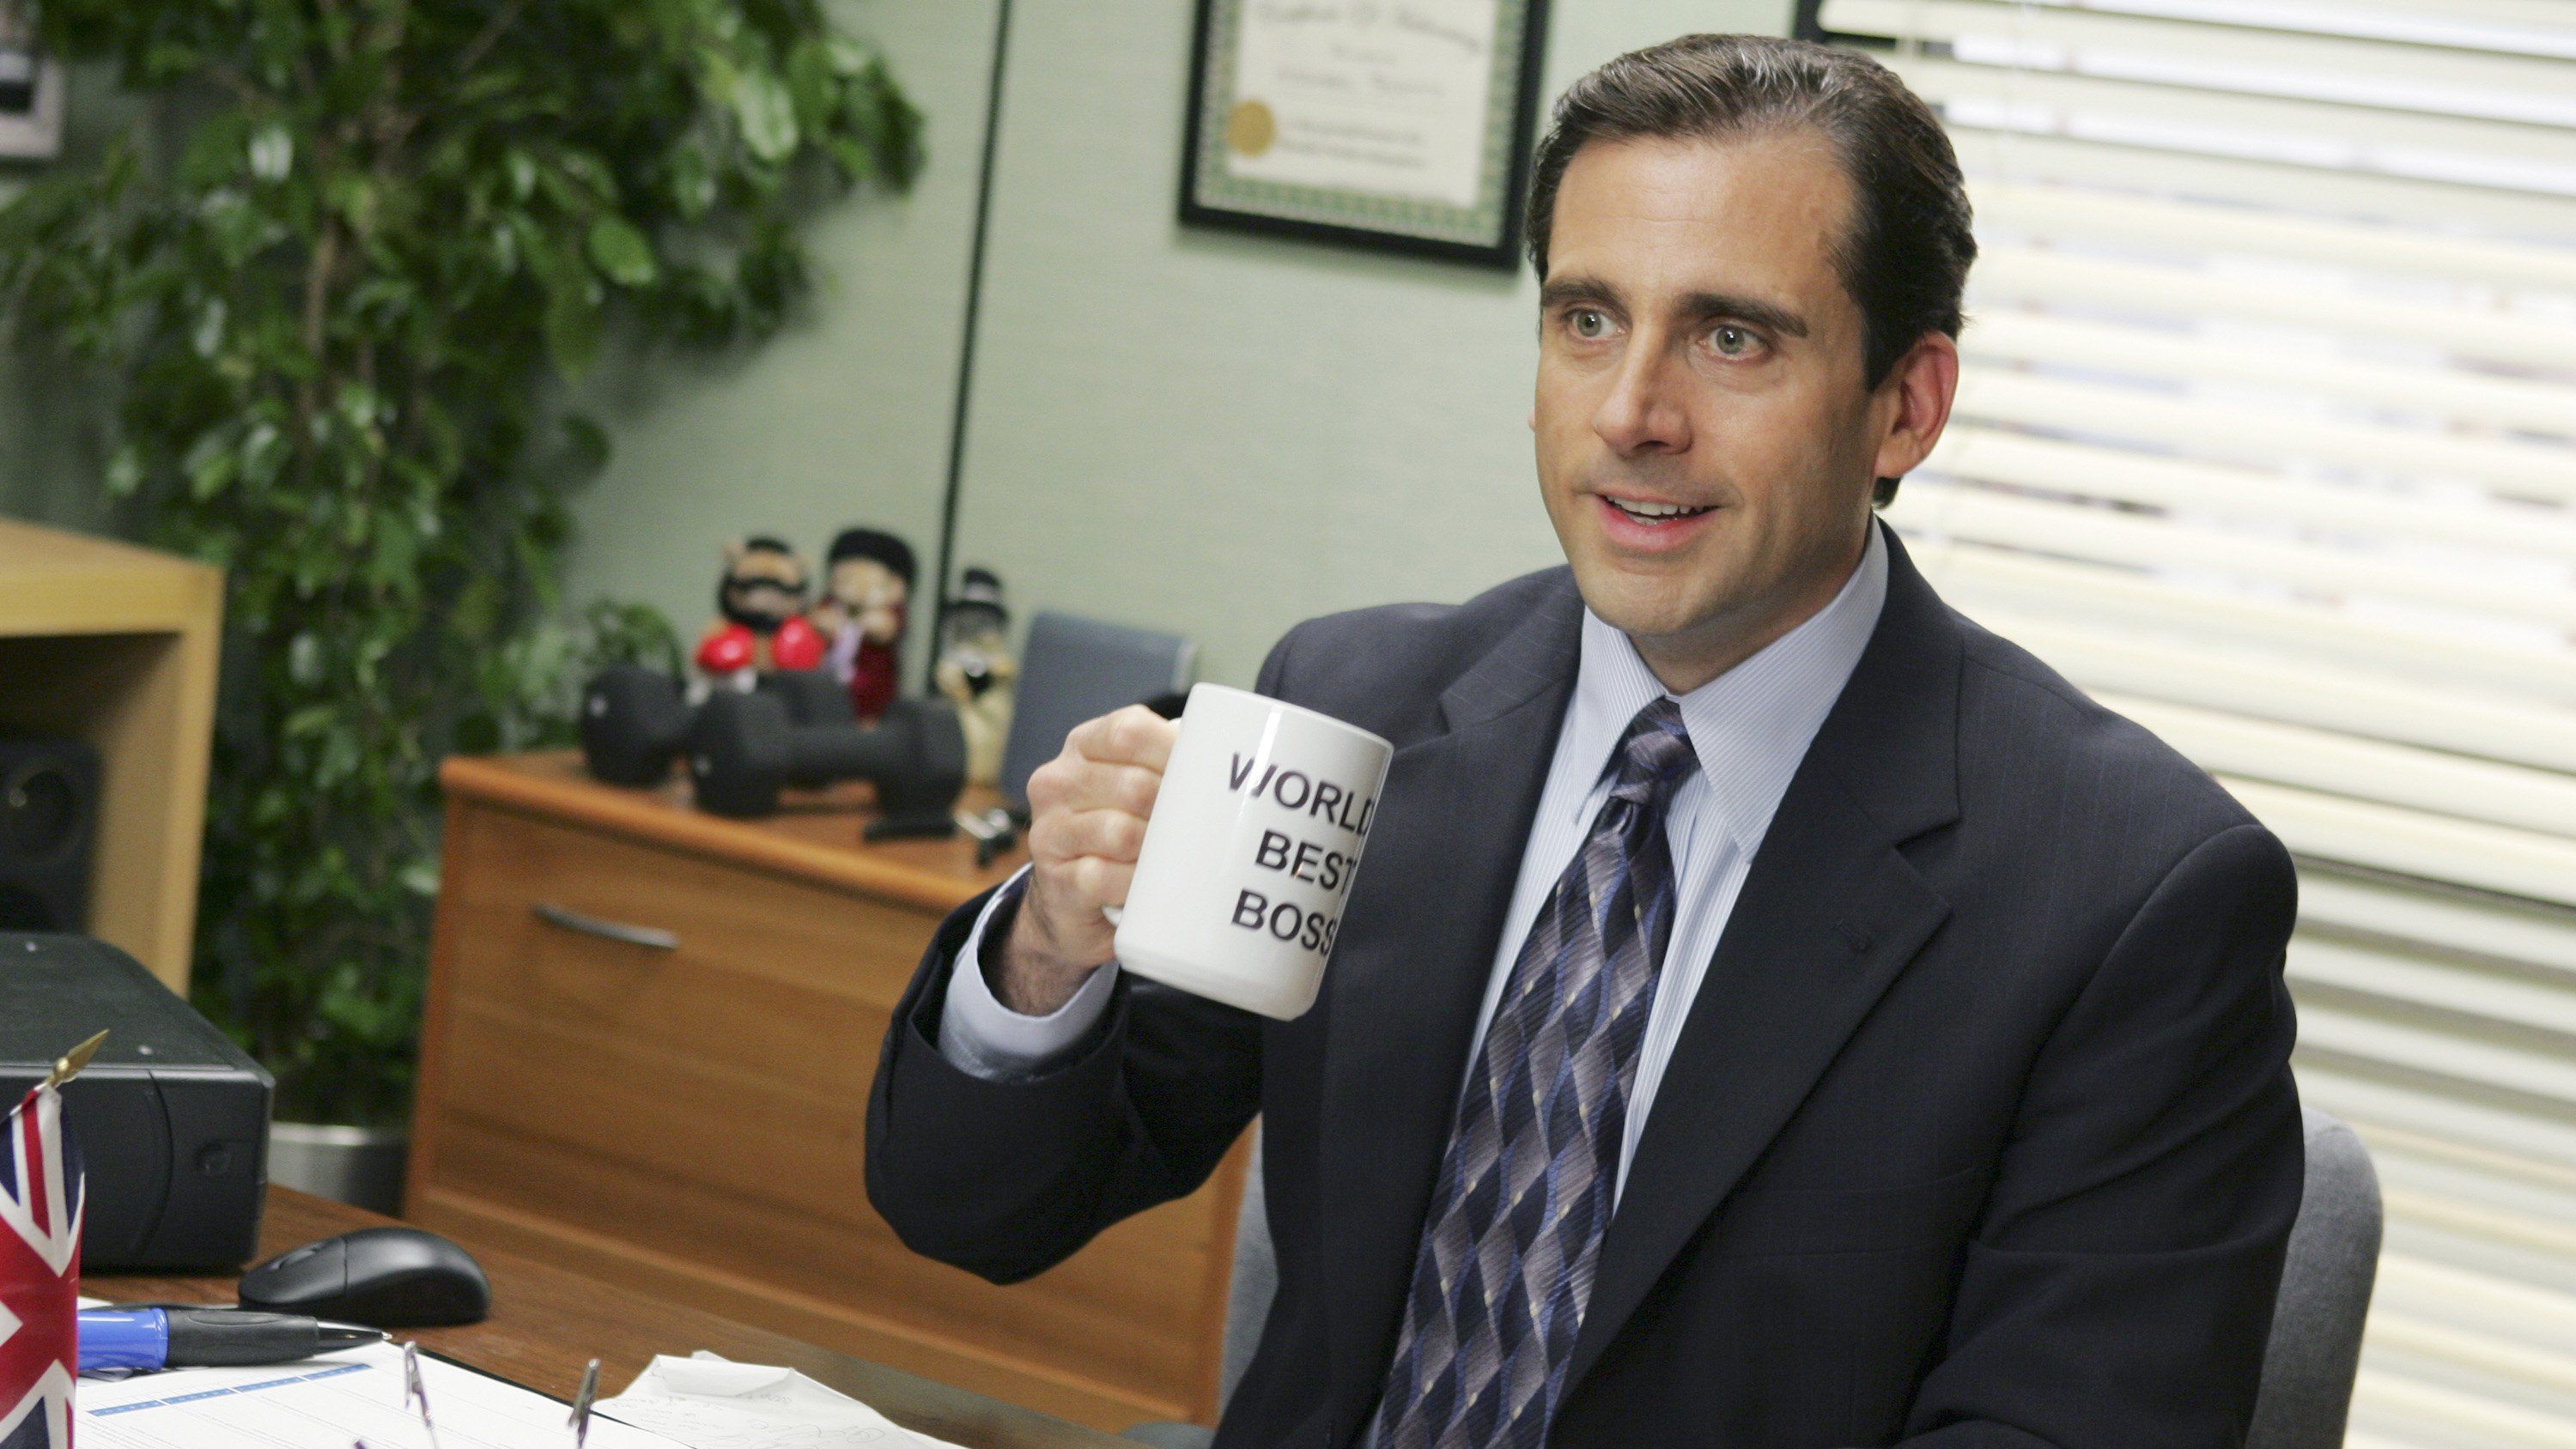 Steve Carell says filming Michael Scott's farewell on 'The Office